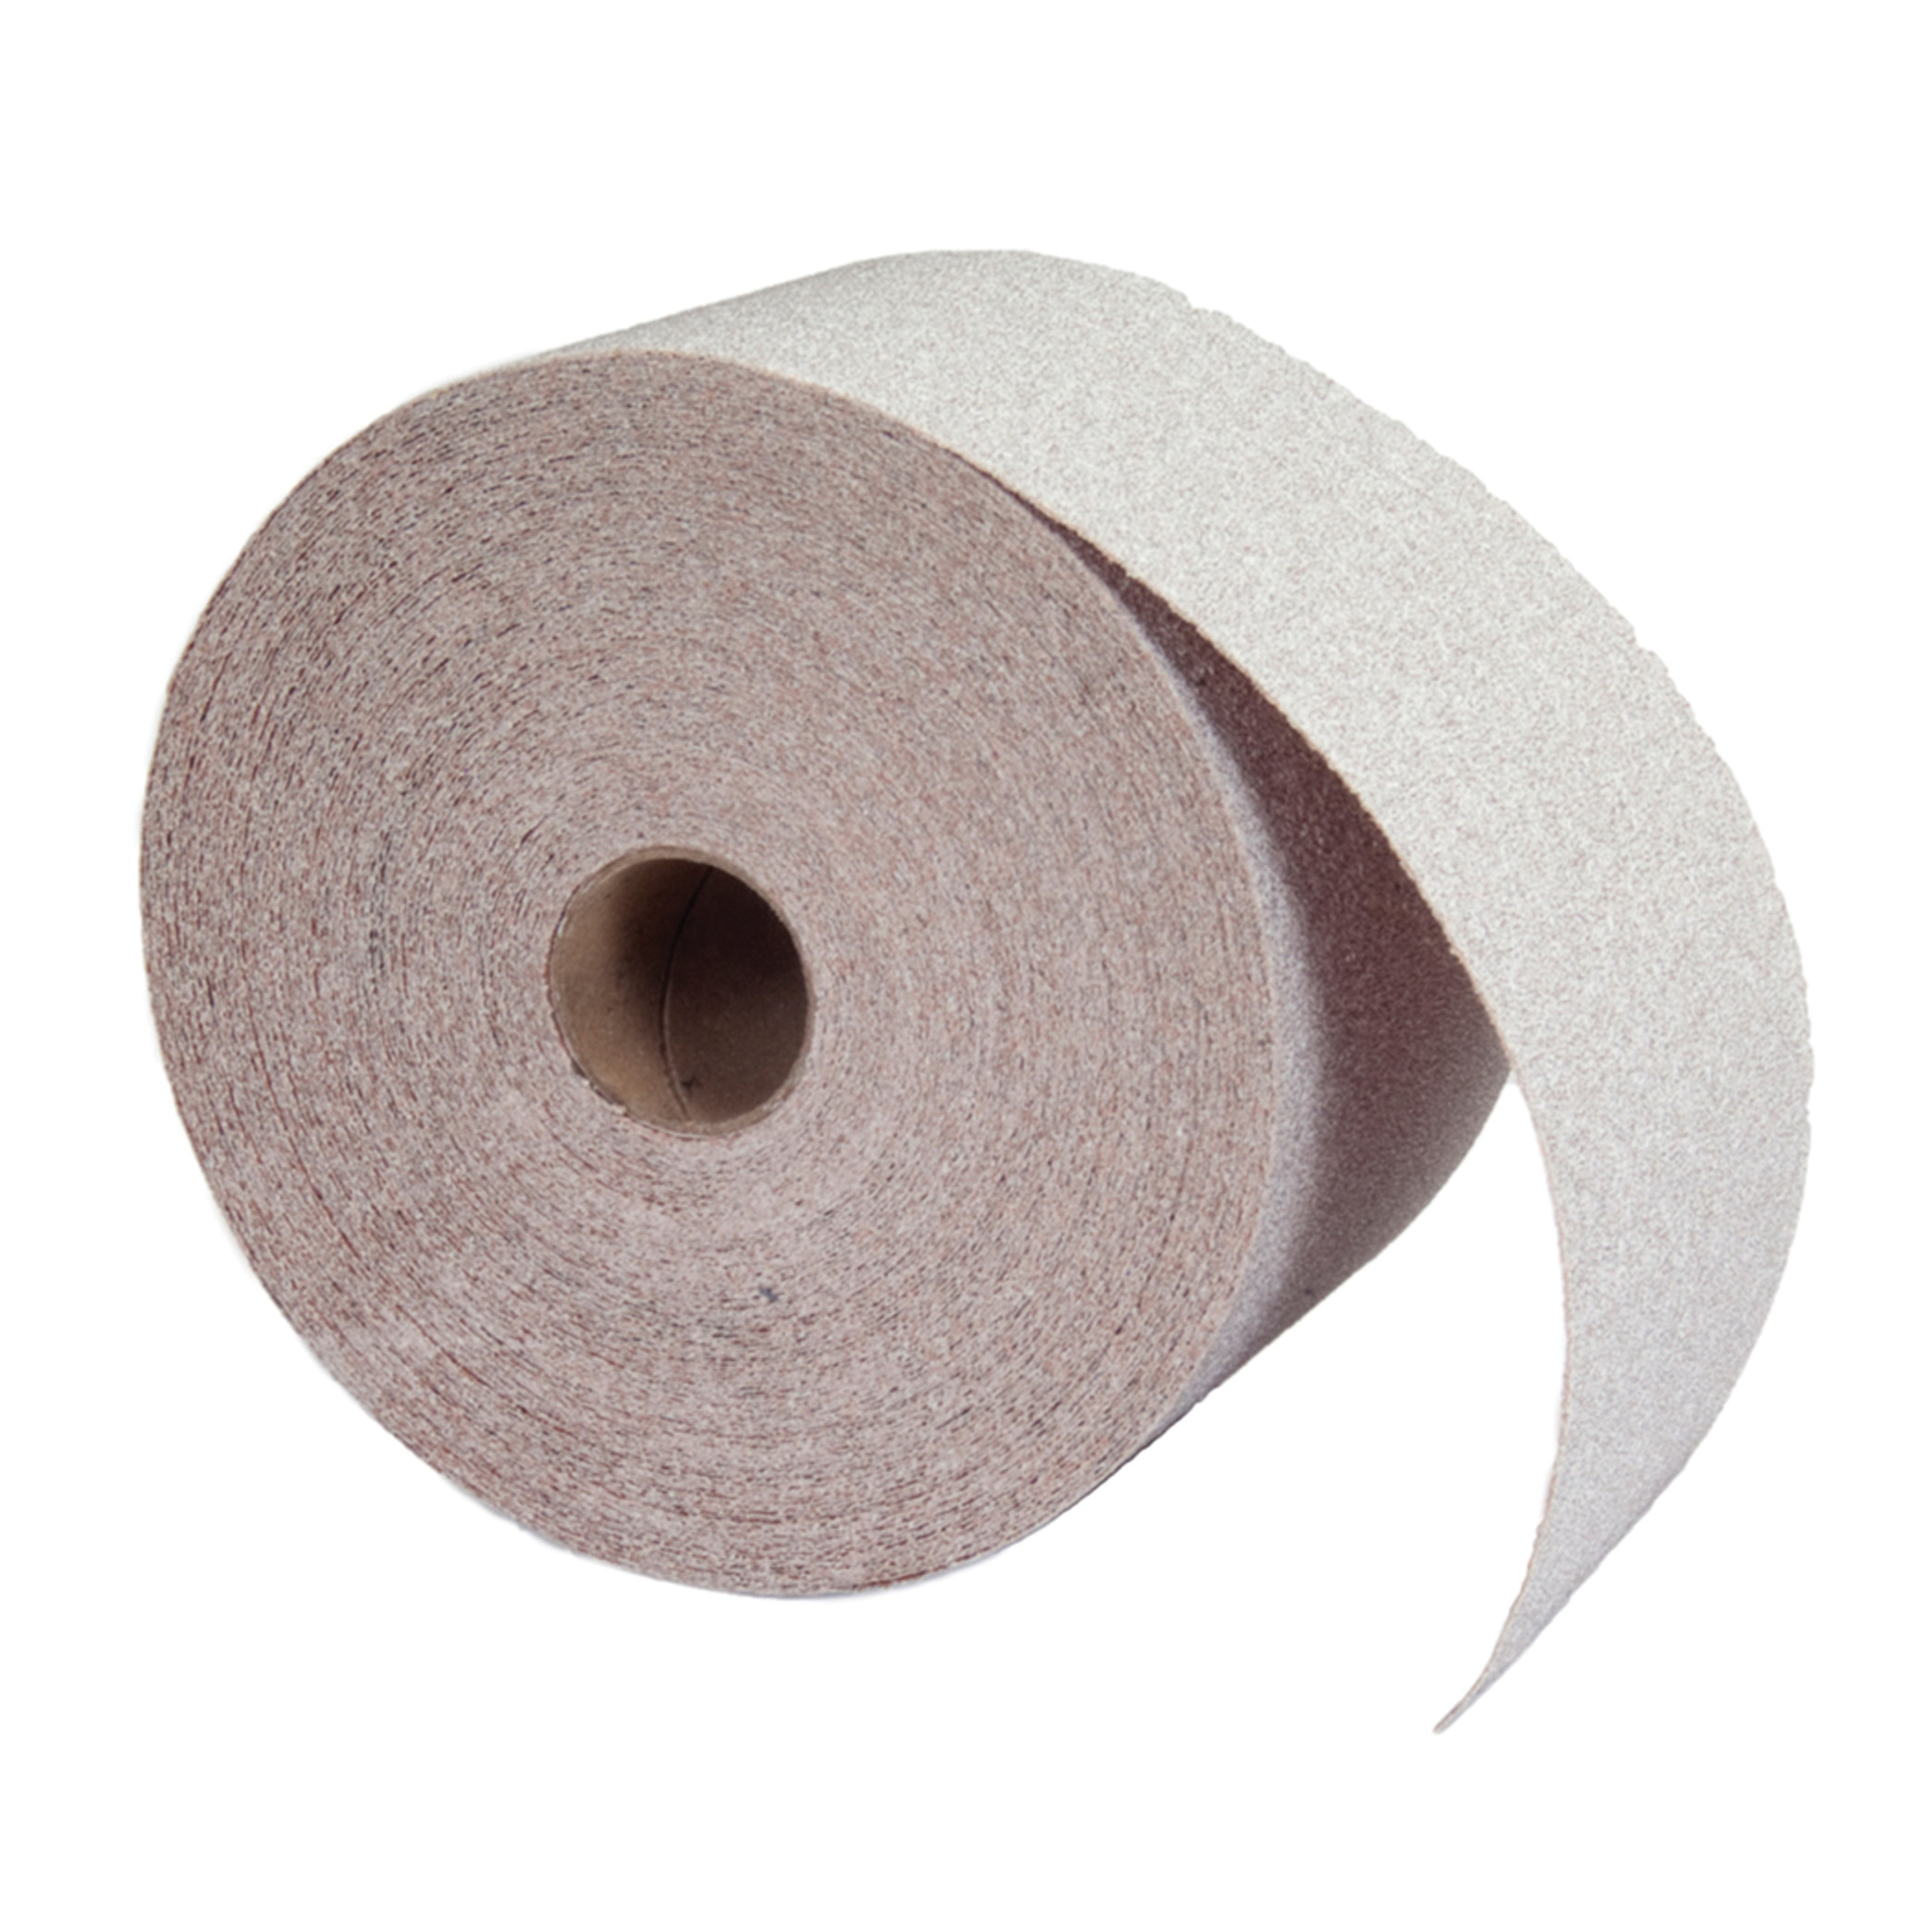 Norton® 66261131683 OP A275 Coated Abrasive Roll, 45 yd L x 2-3/4 in W, 320 Grit, Extra Fine Grade, Aluminum Oxide Abrasive, Anti-Loading Paper Backing